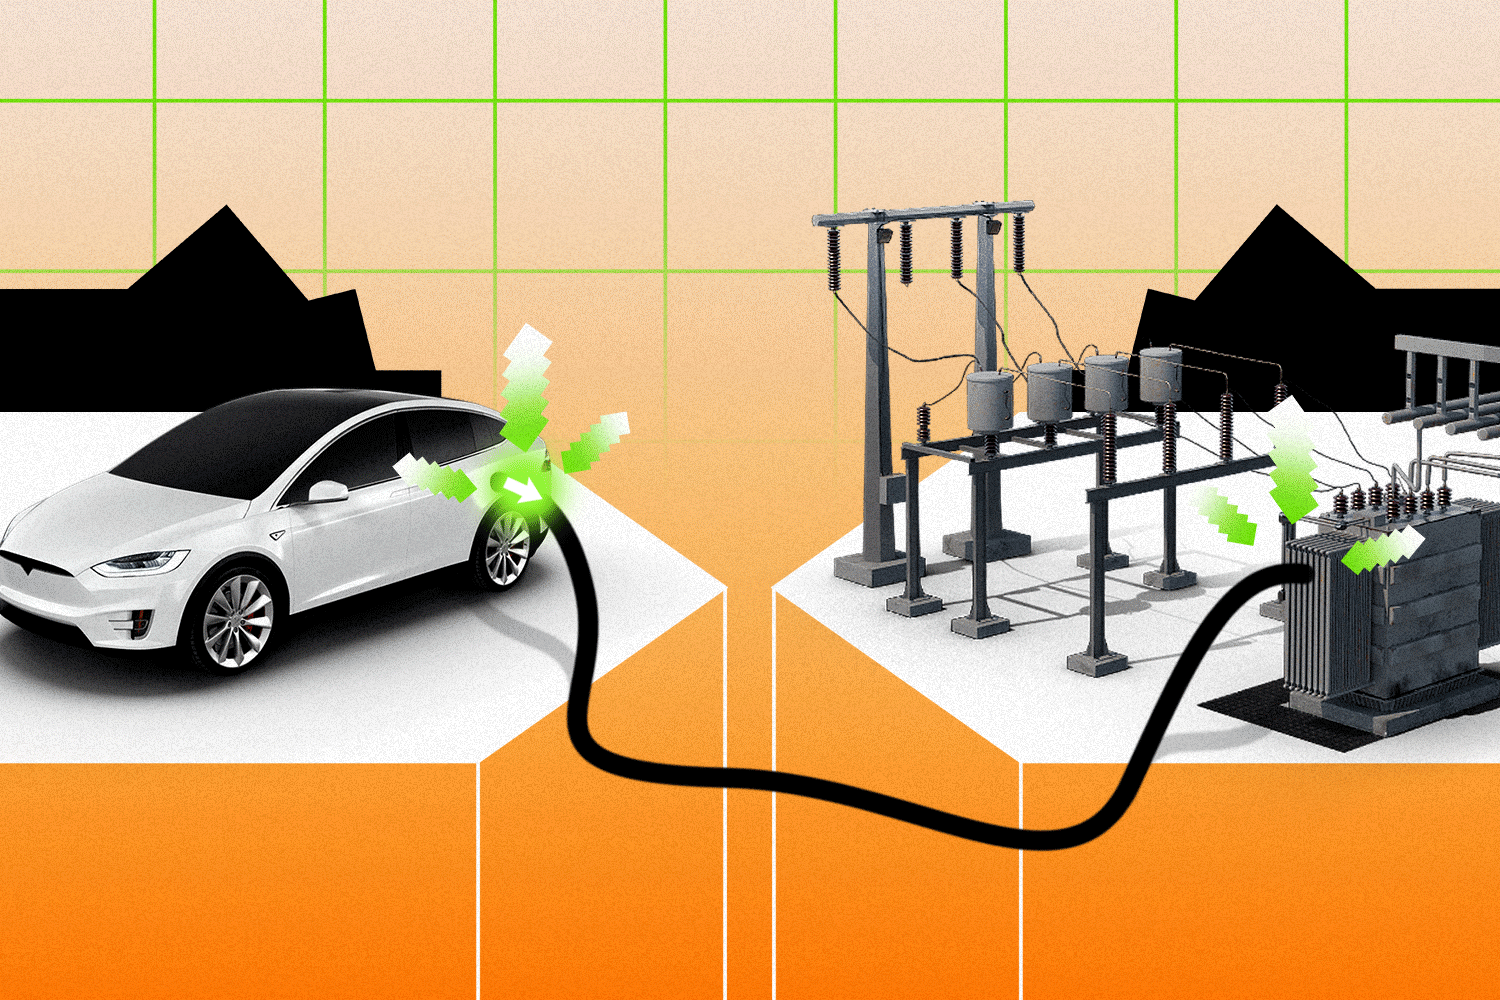 California’s vehicle-to-grid experiments offer a glimpse of the future